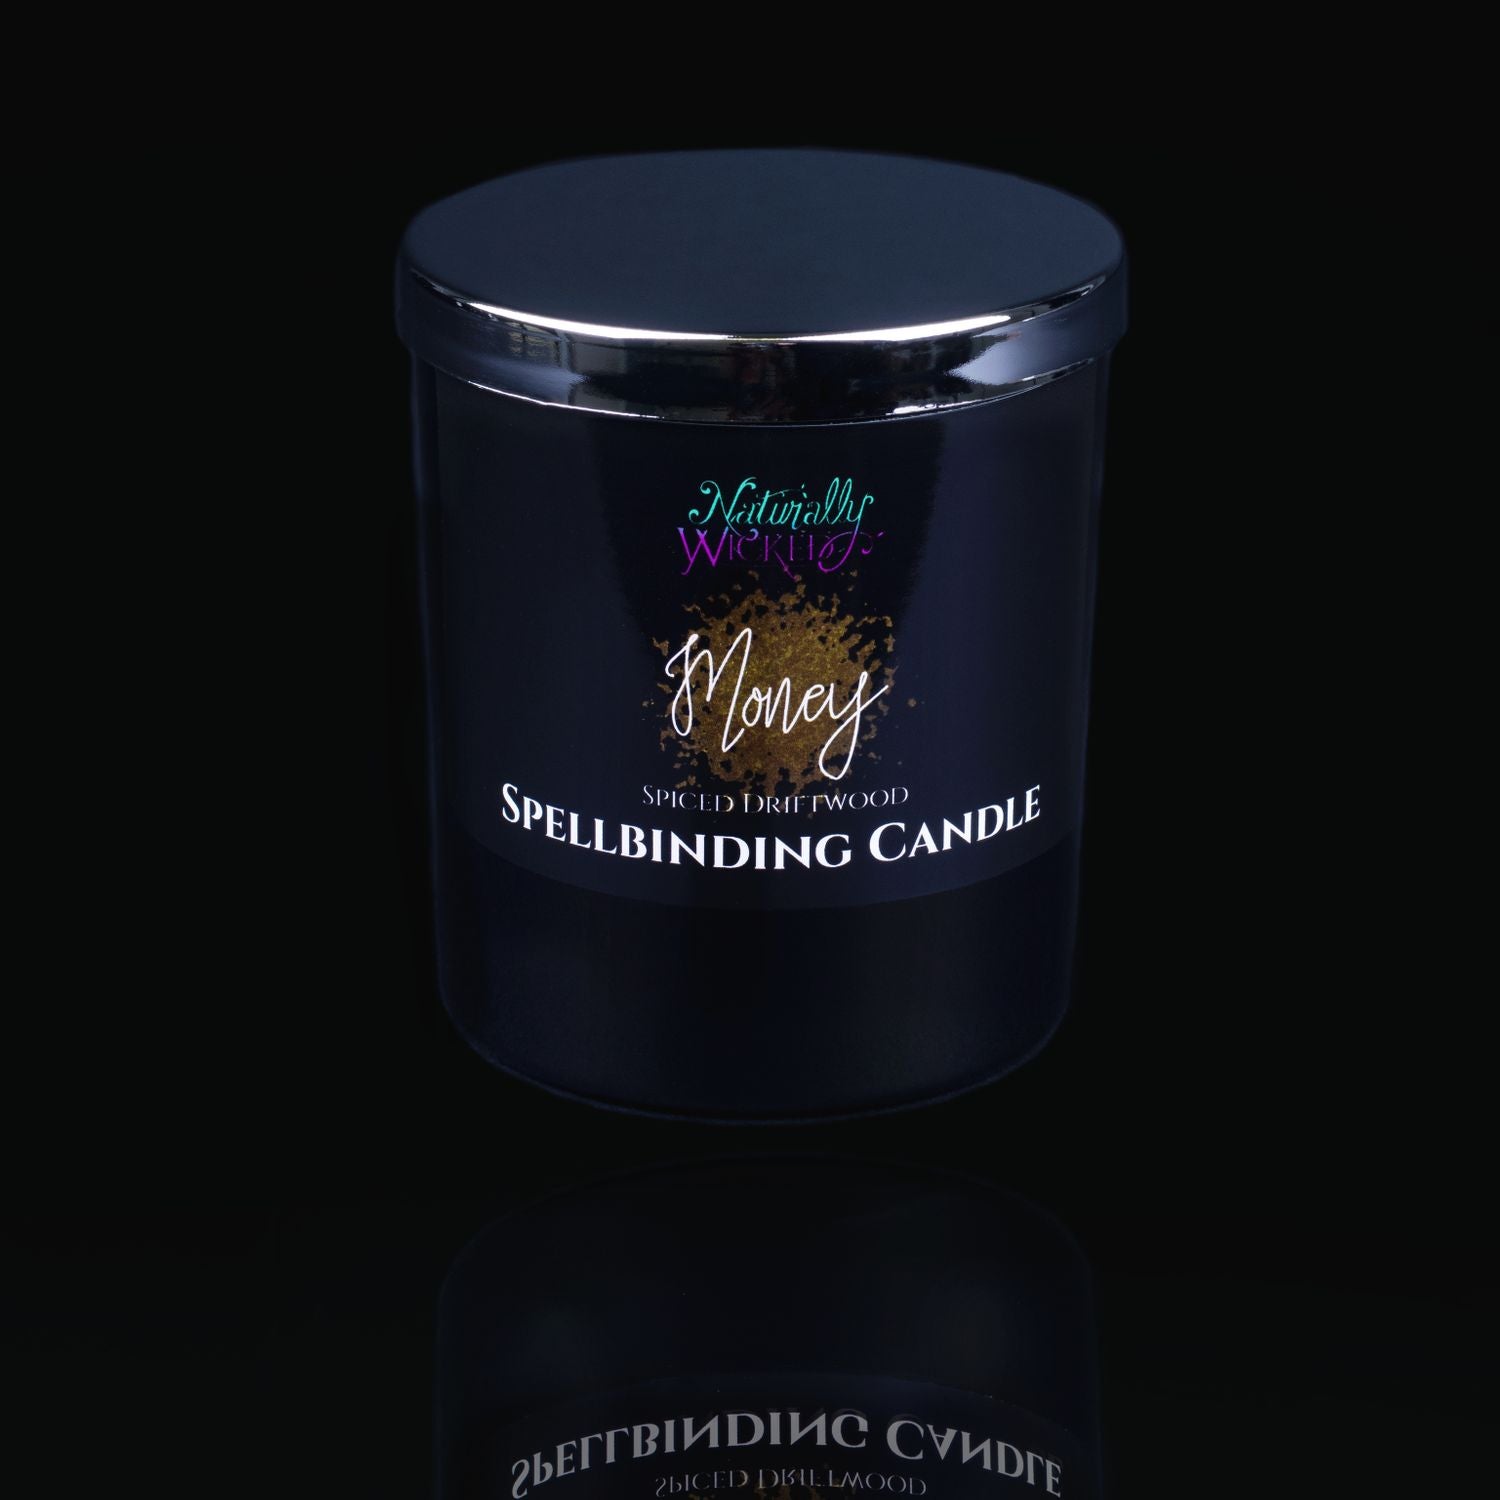 Naturally Wicked Spellbinding Money Spell Candle With Mirror Finished Exquisite Lid In Place. Featuring A Black Gloss Label And An Explosion Of Gold Dust. This Classic Gift Is Better Than Money Itself